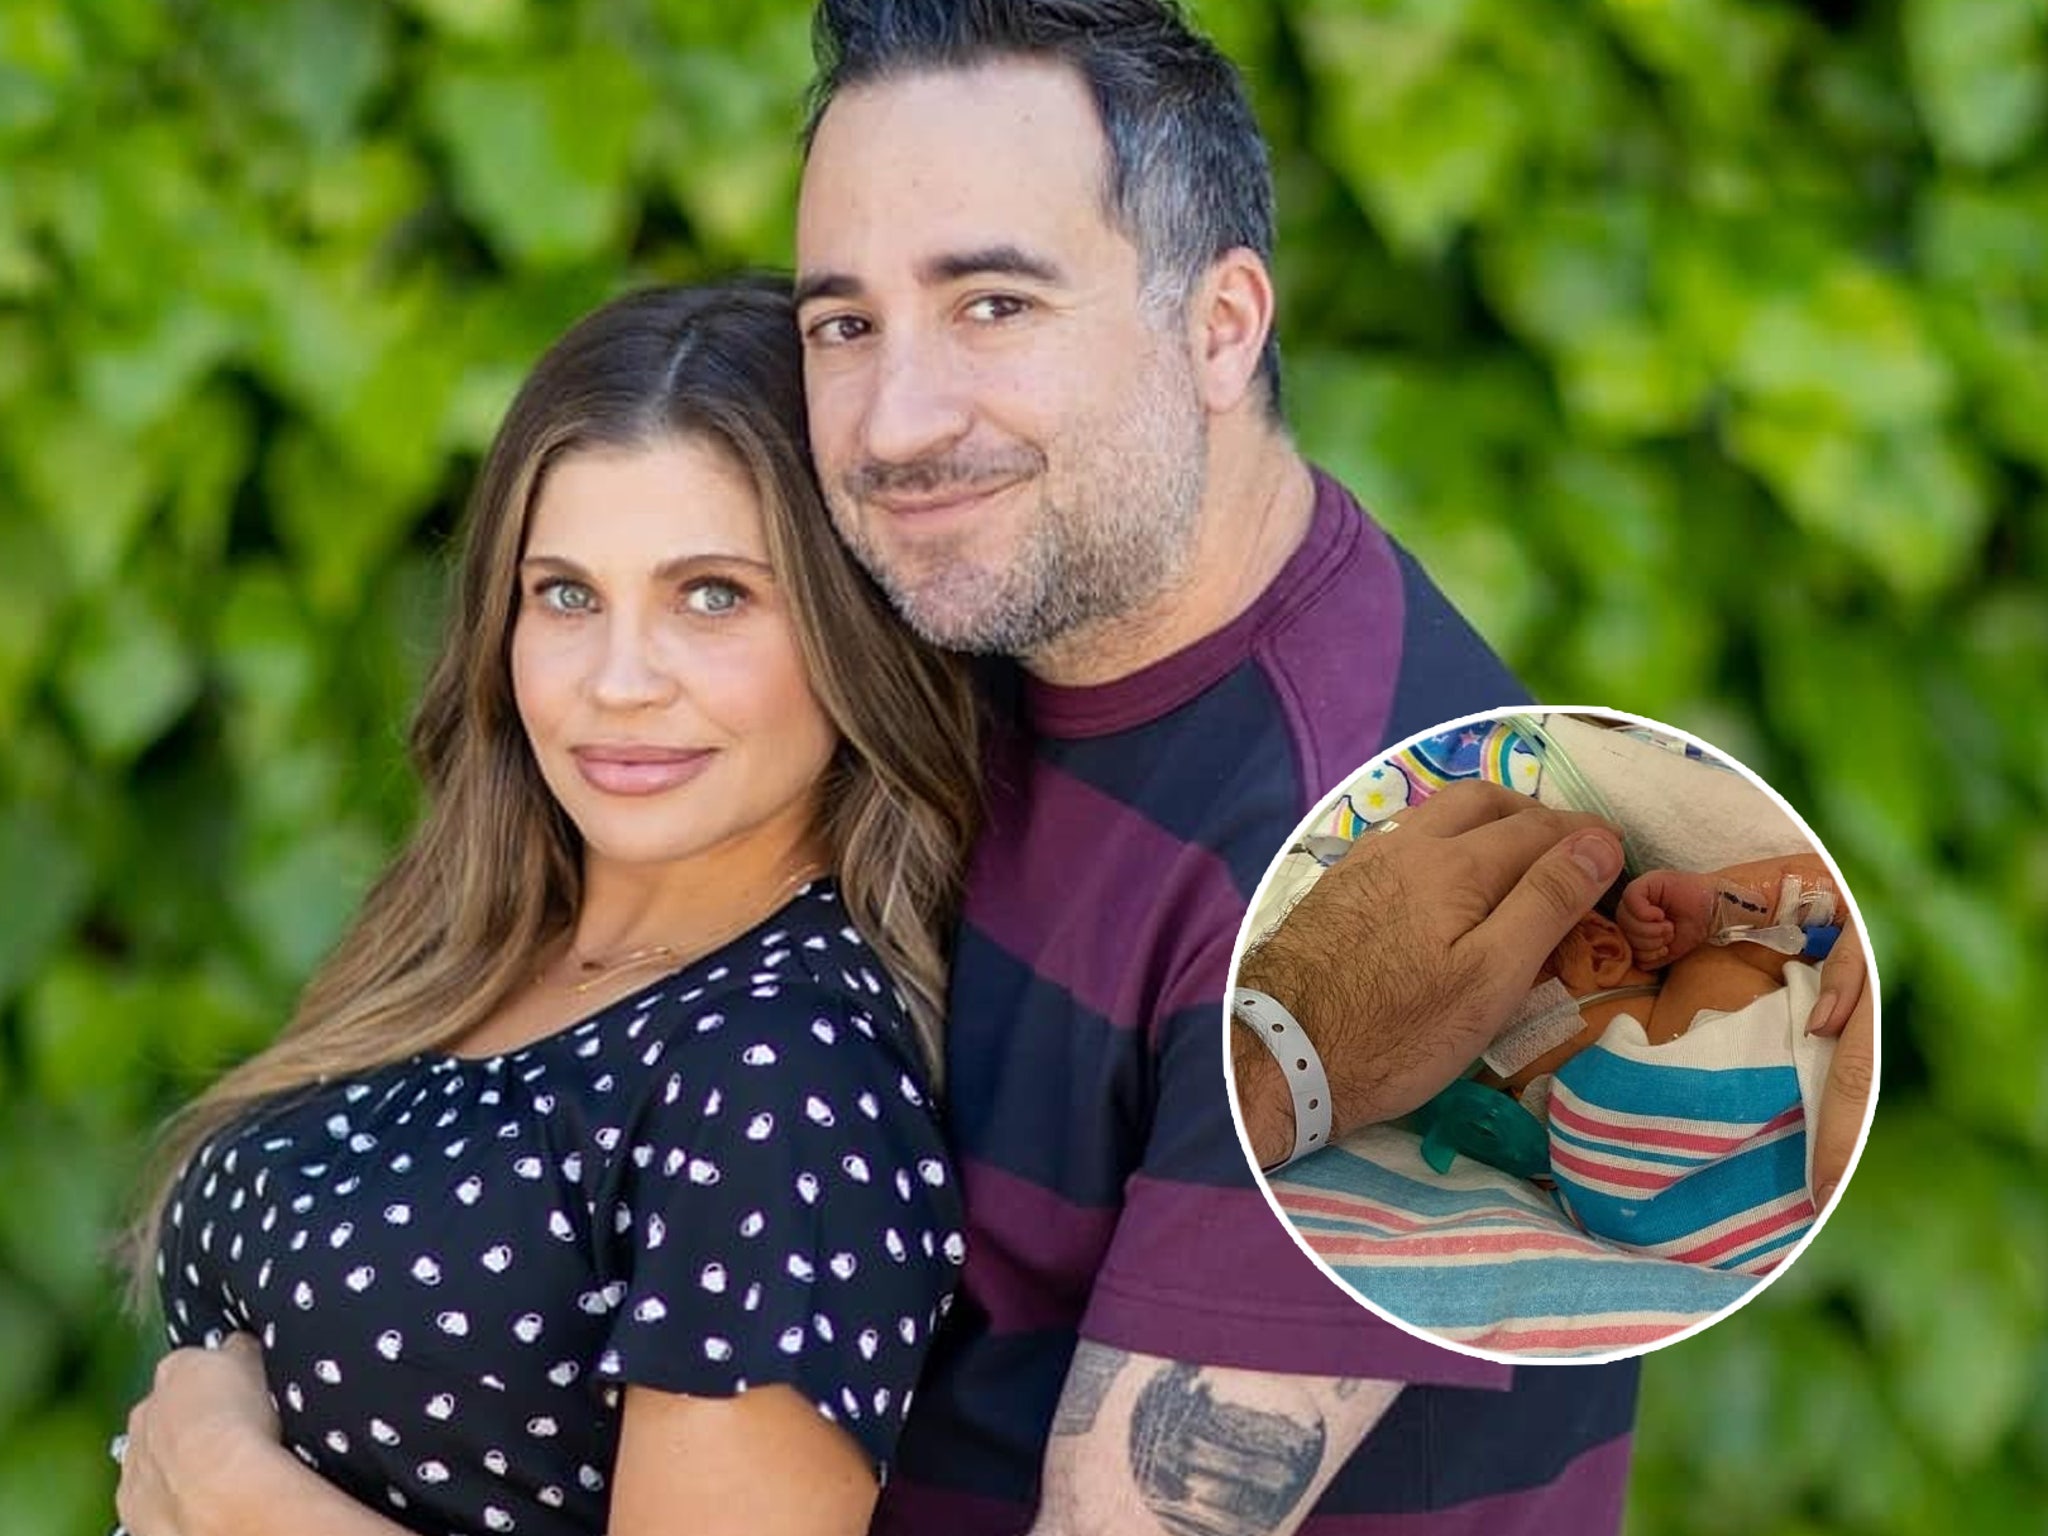 Pregnant-Danielle-Fishel-Shares-Adorable-First-Baby-Bump-Pic.jpg?quality=86&strip=all